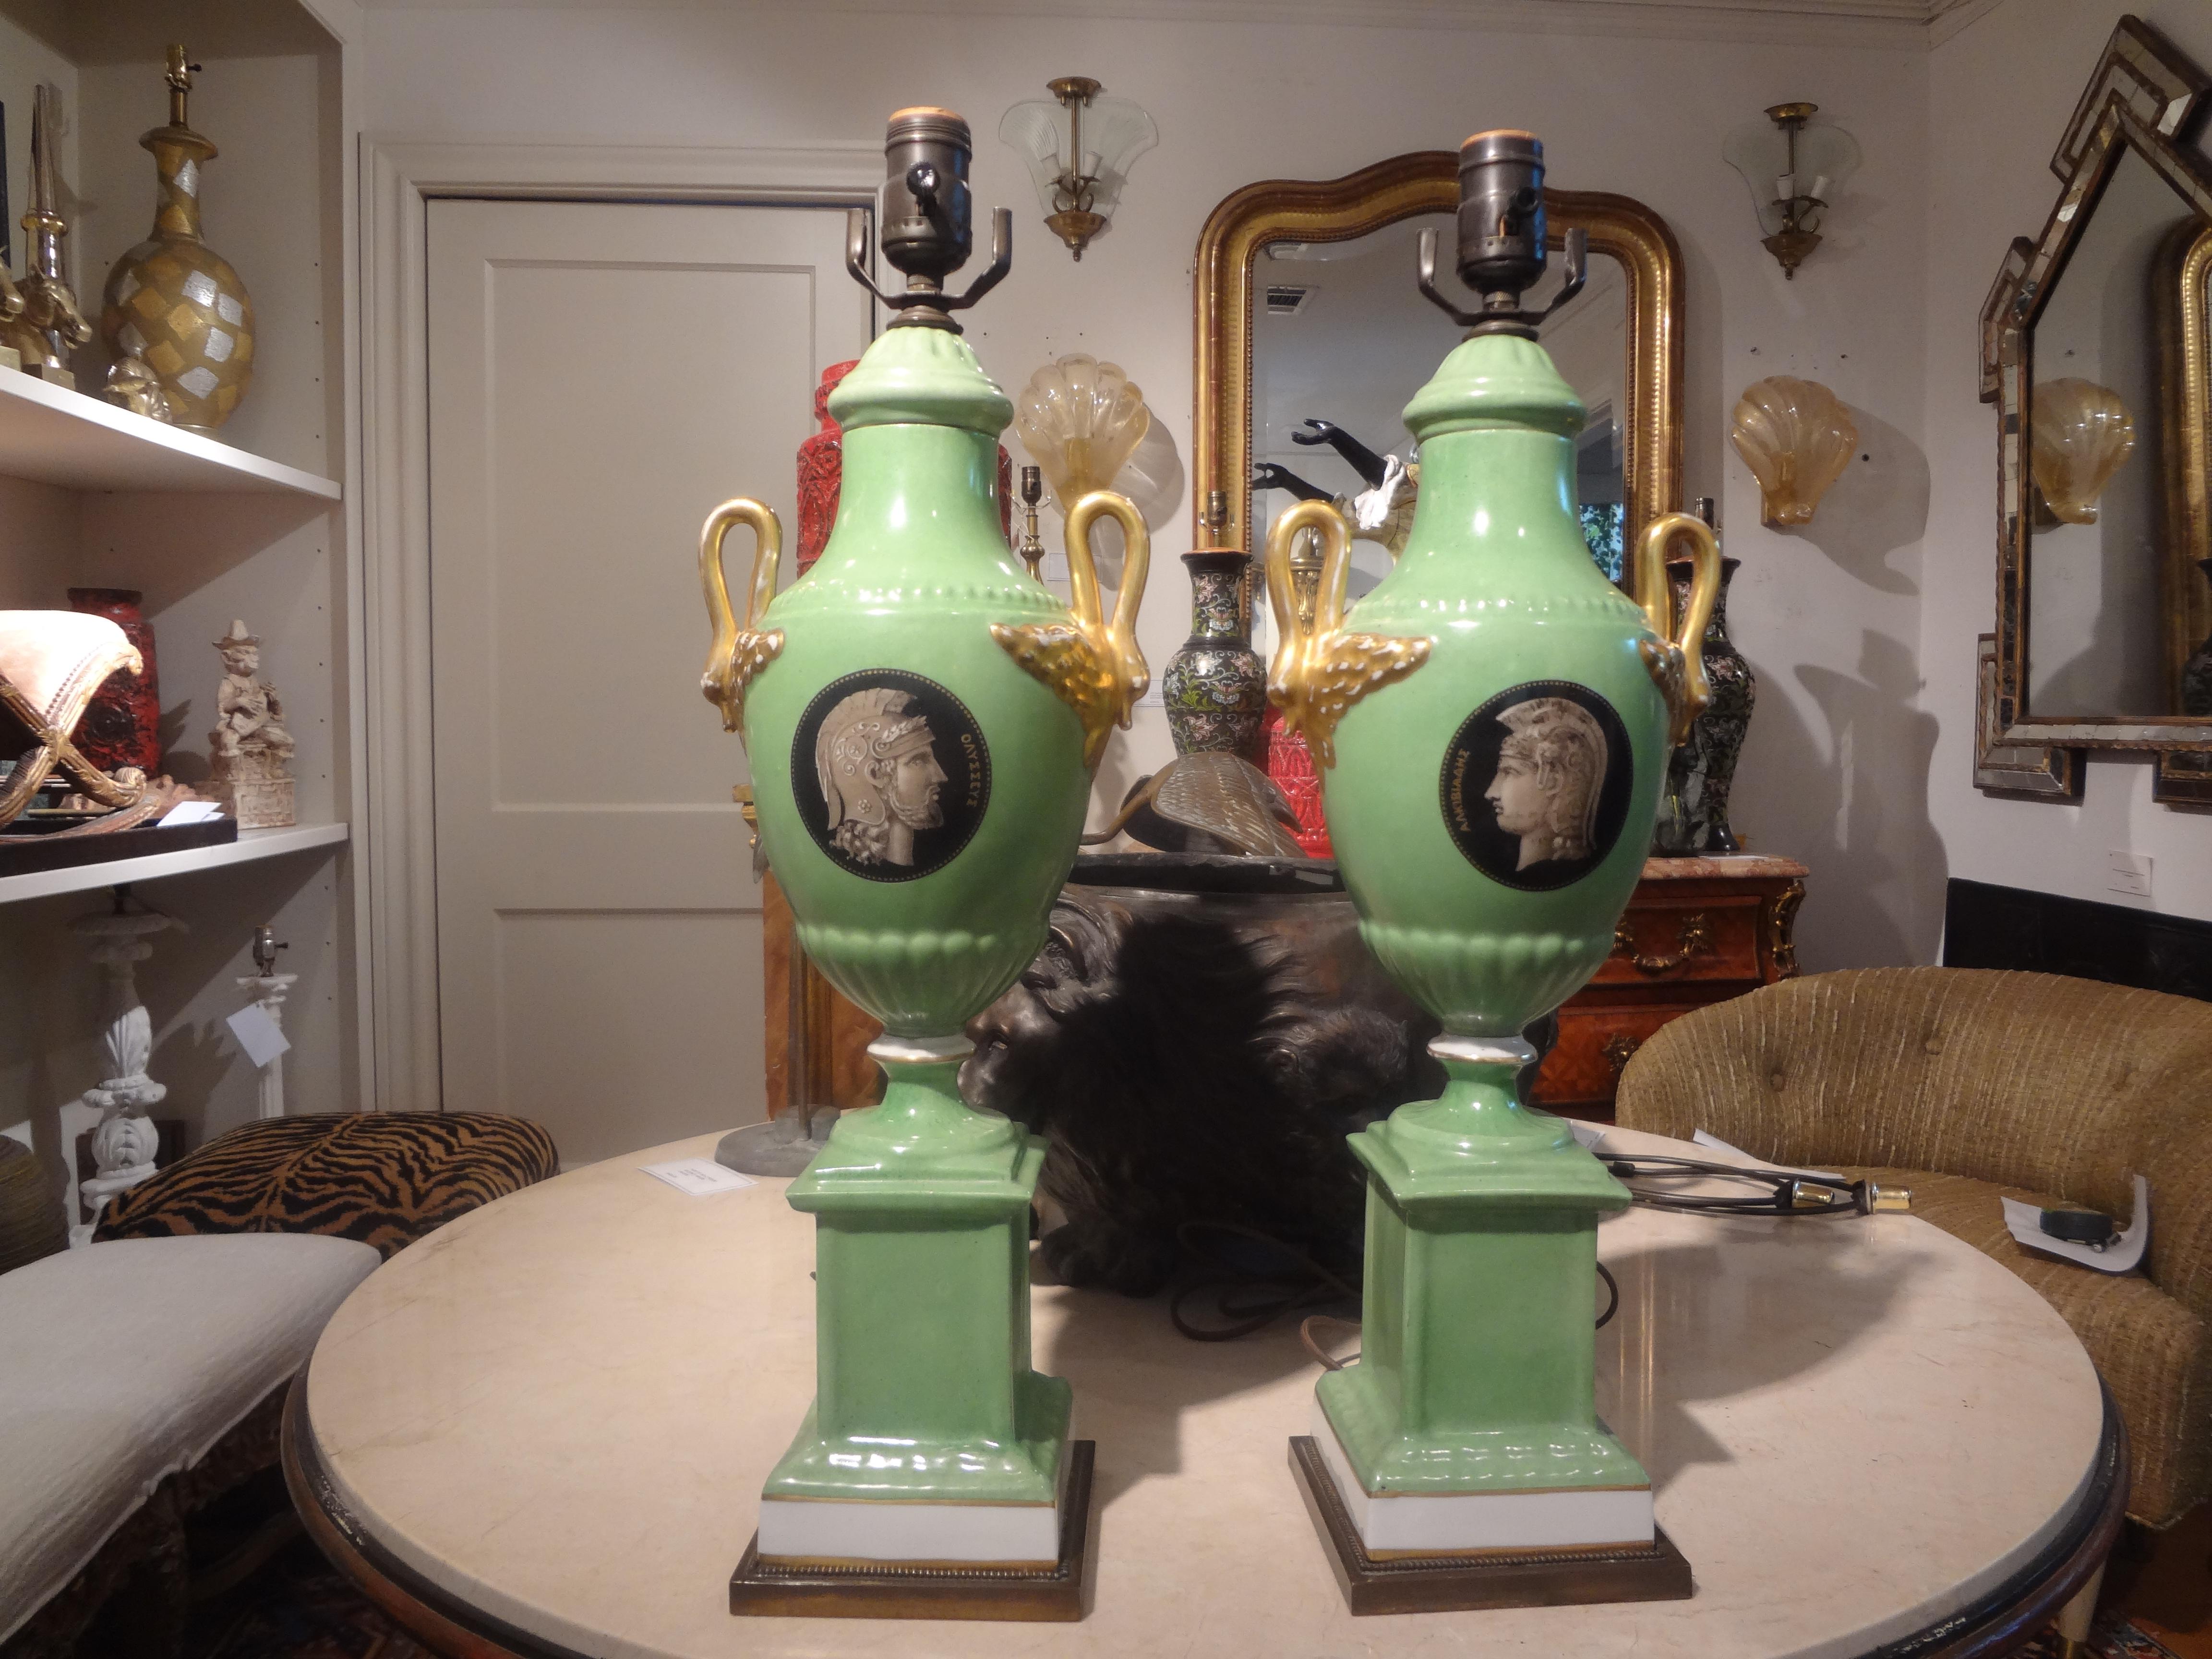 Pair of Italian Neoclassical style porcelain lamps.
Stunning pair of Italian Neoclassical style Porcelain lamps with opposing Greek inspired faces, gilt swan handles and brass bases. These gorgeous lamps in a lovely l shade of green have been